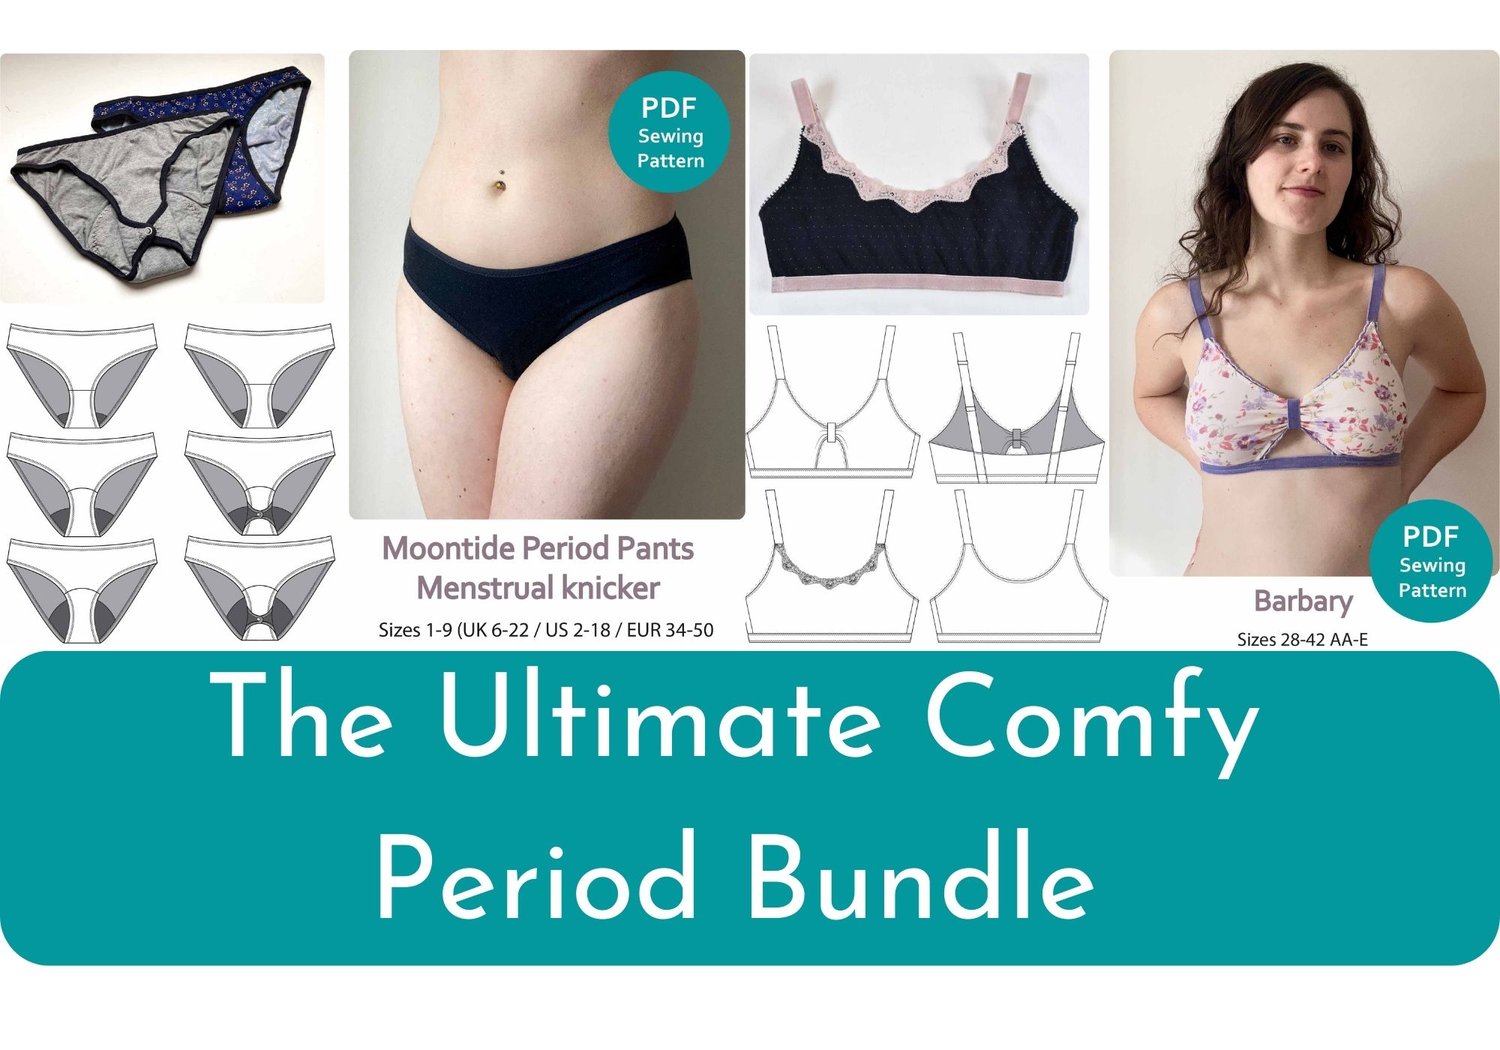 The Ultimate Comfy Period Bundle Includes the Moontide Period